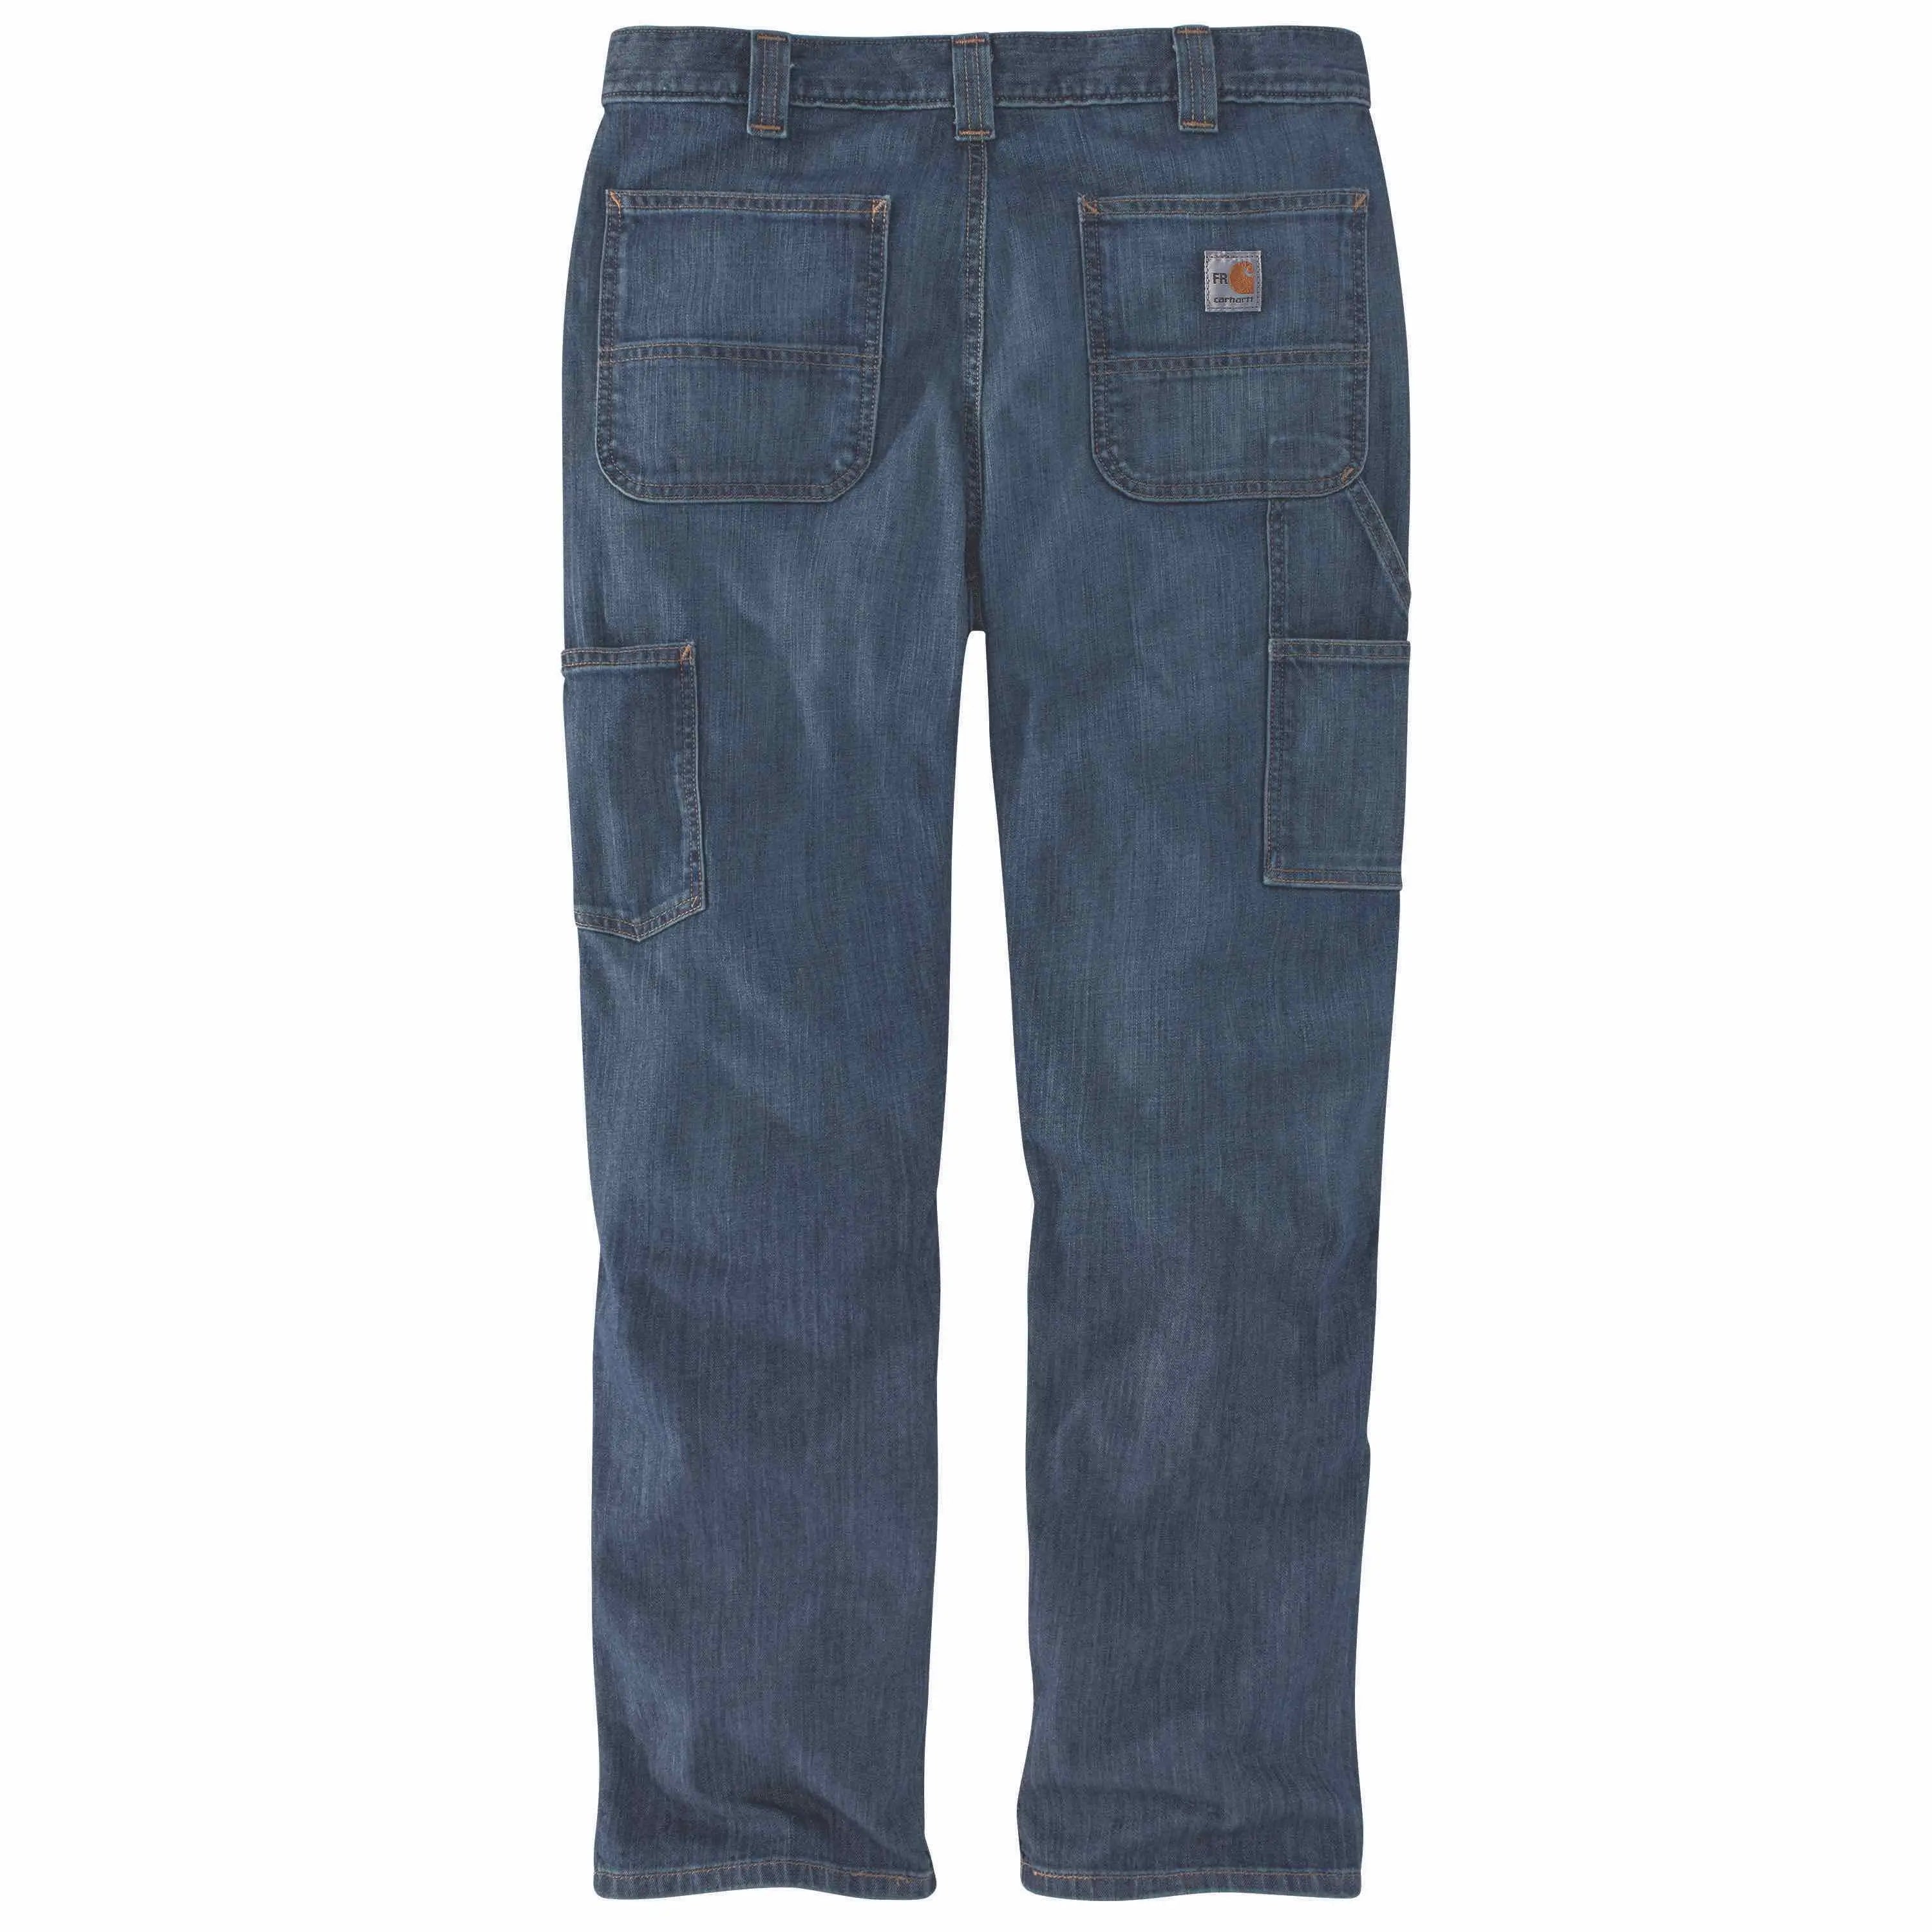 CARHARTT - FR FORCE RUGGED FLEX RELAXED FIT UTILITY JEAN  Becker Safety and Supply